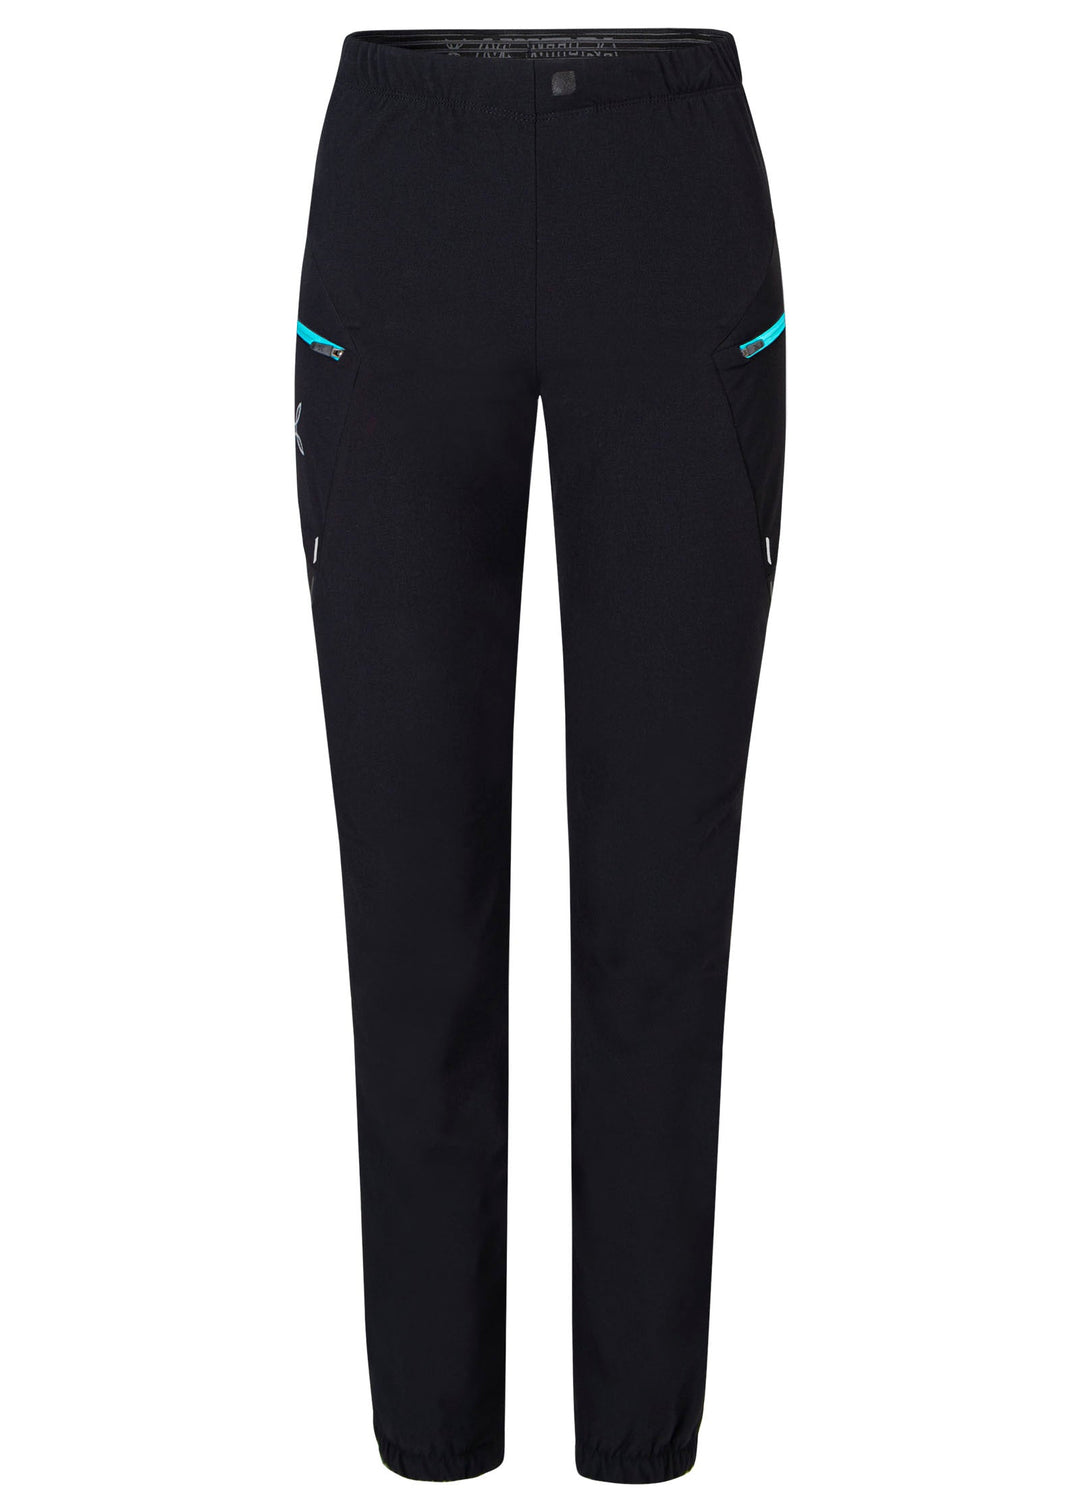 Speed Style Pants Woman - Nero/Care Blue (9028) - Blogside